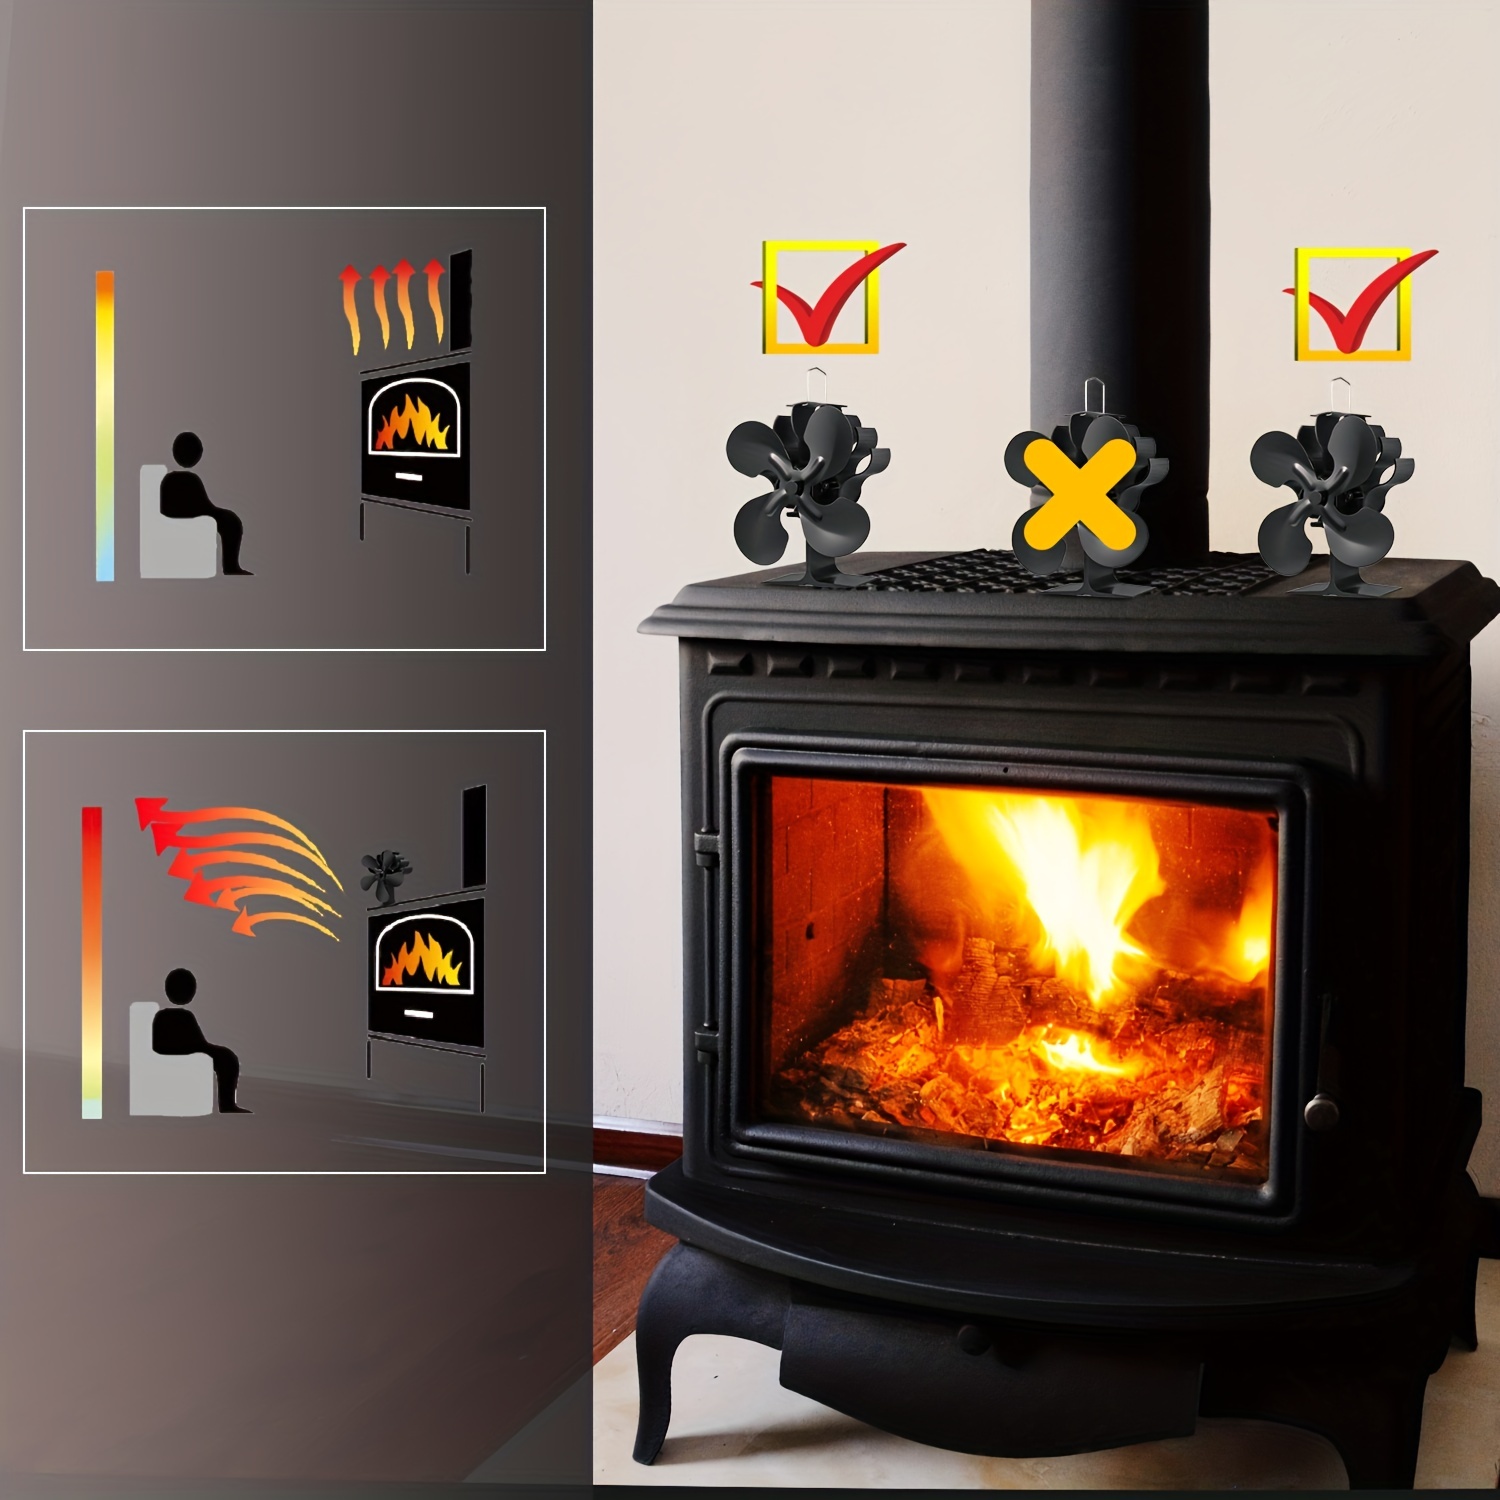 Wood Stove Fan Wood Burning Stove Fan Thermoelectric Wood Stove Fans For  Log Wood Pellet Burning Stoves Save Energy & Efficient - AliExpress